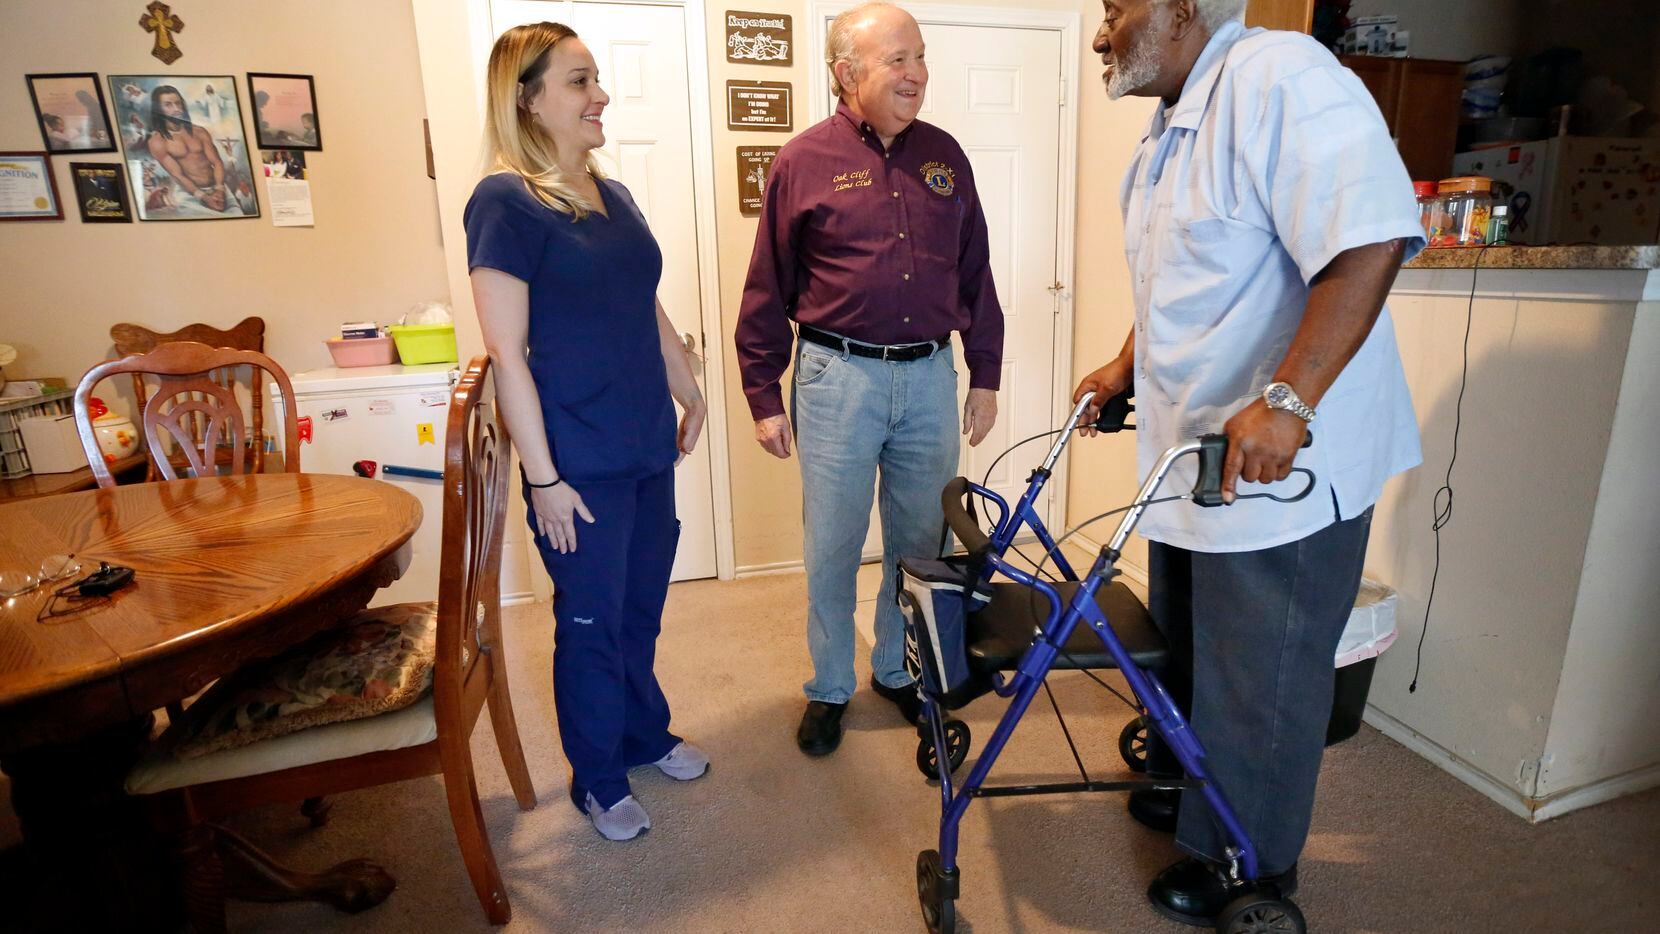 Meals on Wheels recipient George Kelley visited with Abby Tupper and her father Charlie...